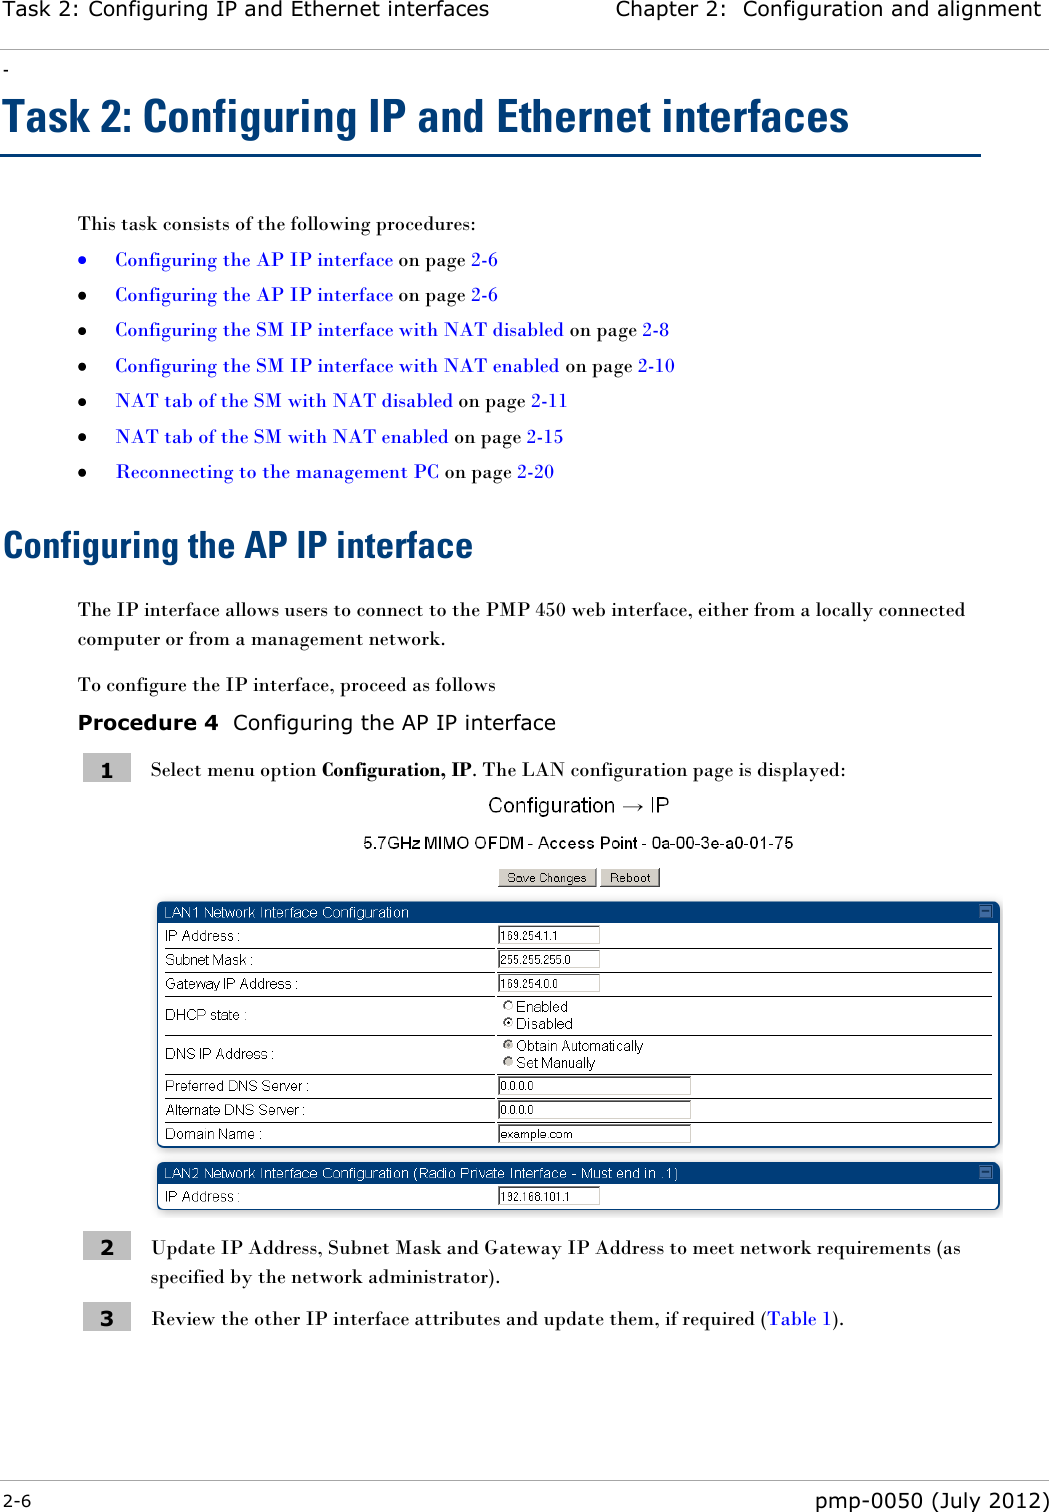 Task 2: Configuring IP and Ethernet interfaces Chapter 2:  Configuration and alignment - 2-6  pmp-0050 (July 2012)  Task 2: Configuring IP and Ethernet interfaces This task consists of the following procedures:  Configuring the AP IP interface on page 2-6  Configuring the AP IP interface on page 2-6  Configuring the SM IP interface with NAT disabled on page 2-8  Configuring the SM IP interface with NAT enabled on page 2-10  NAT tab of the SM with NAT disabled on page 2-11  NAT tab of the SM with NAT enabled on page 2-15  Reconnecting to the management PC on page 2-20 Configuring the AP IP interface The IP interface allows users to connect to the PMP 450 web interface, either from a locally connected computer or from a management network.   To configure the IP interface, proceed as follows Procedure 4  Configuring the AP IP interface 1 Select menu option Configuration, IP. The LAN configuration page is displayed:  2 Update IP Address, Subnet Mask and Gateway IP Address to meet network requirements (as specified by the network administrator). 3 Review the other IP interface attributes and update them, if required (Table 1). 